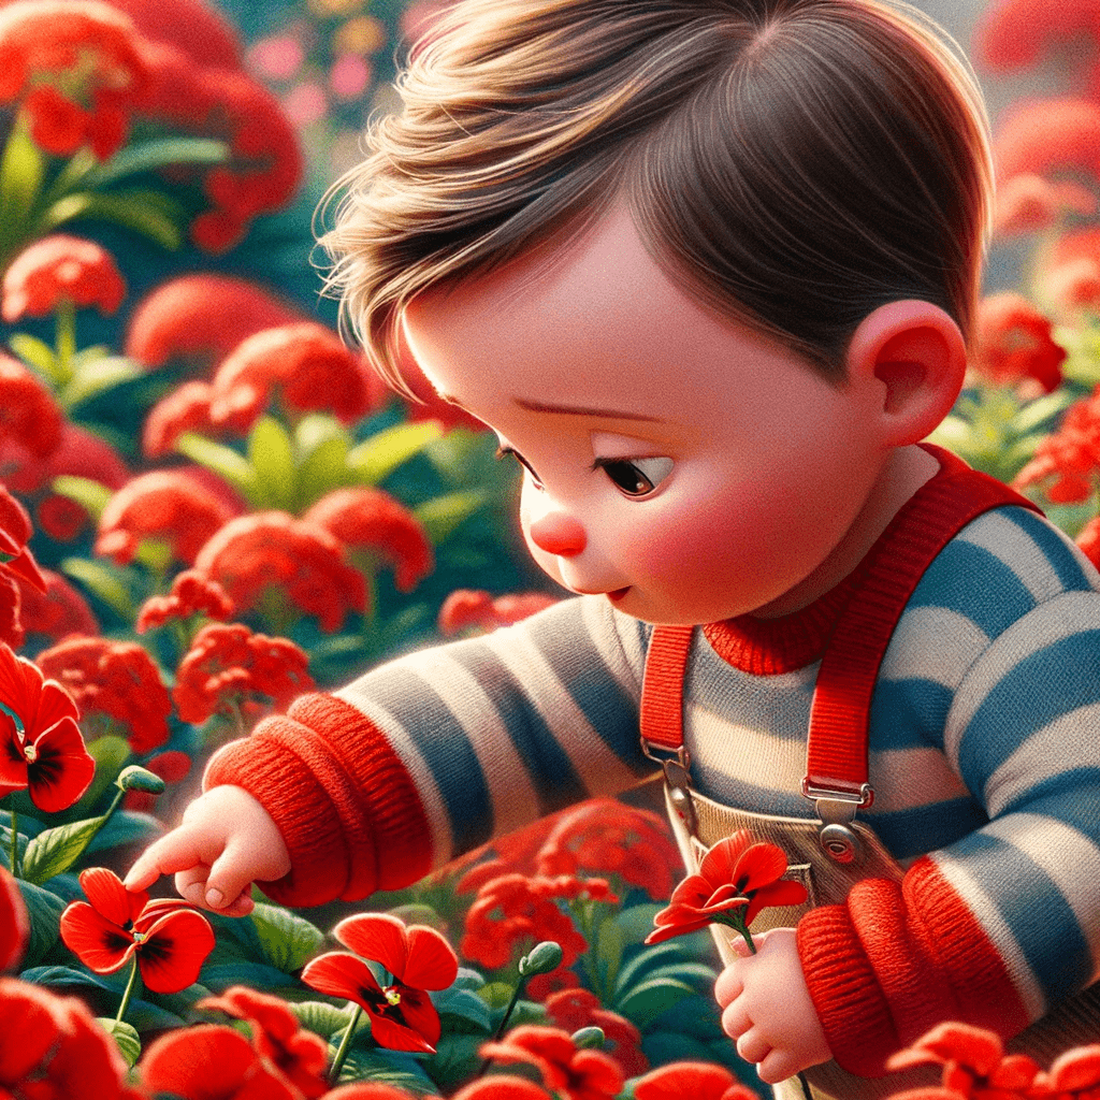 AI art of a young boy in a field of red flowers, cartoon style